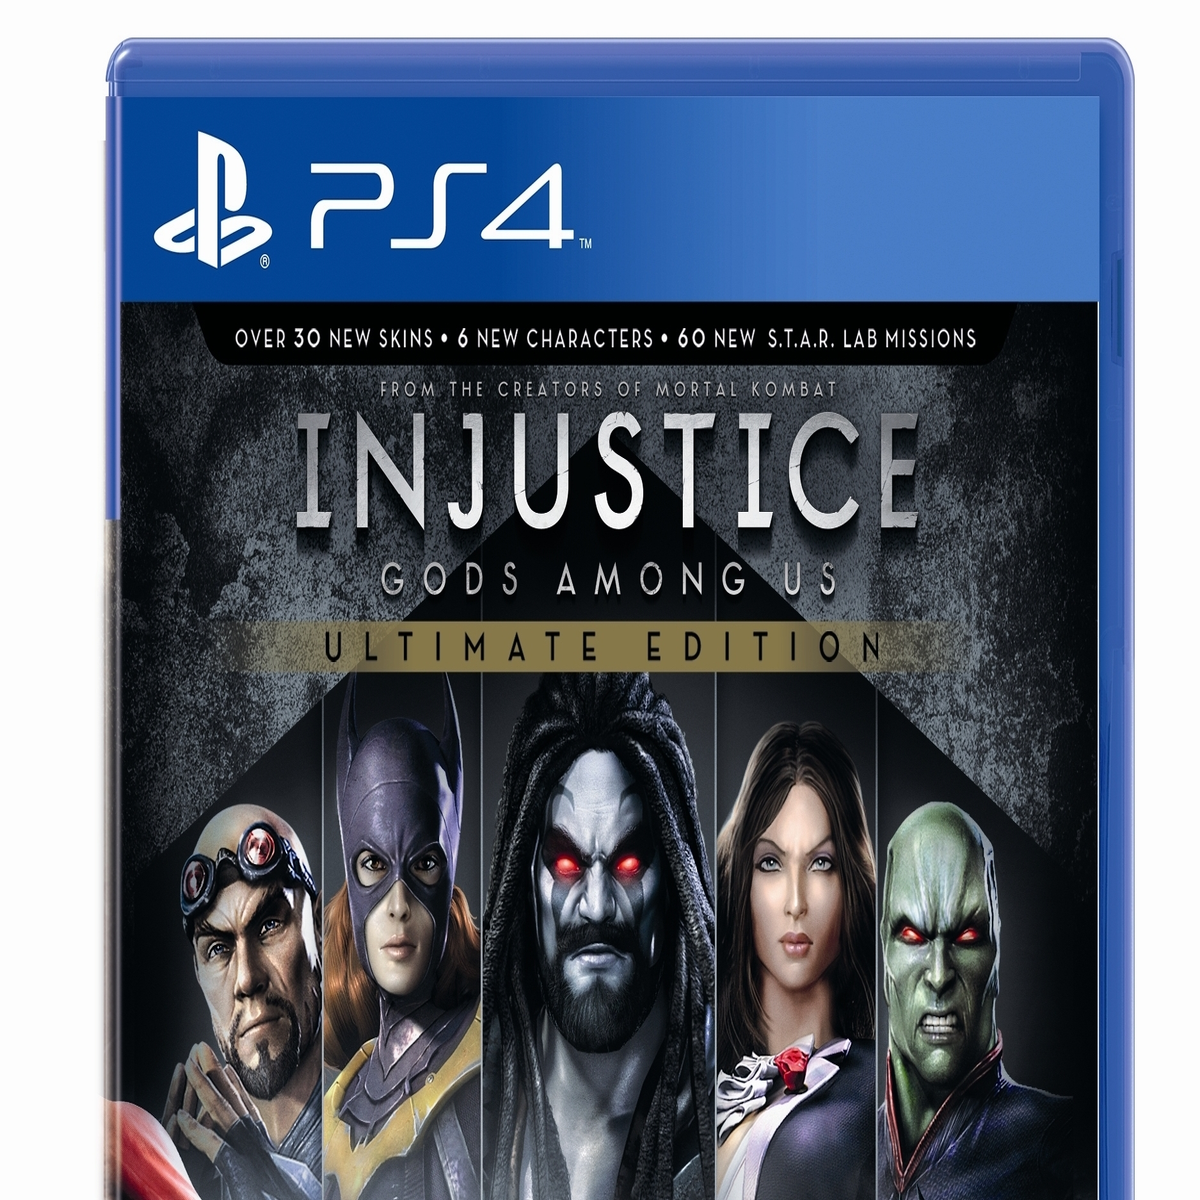 Injustice: Gods Among Us Ultimate Edition - PlayStation 3, PlayStation 3